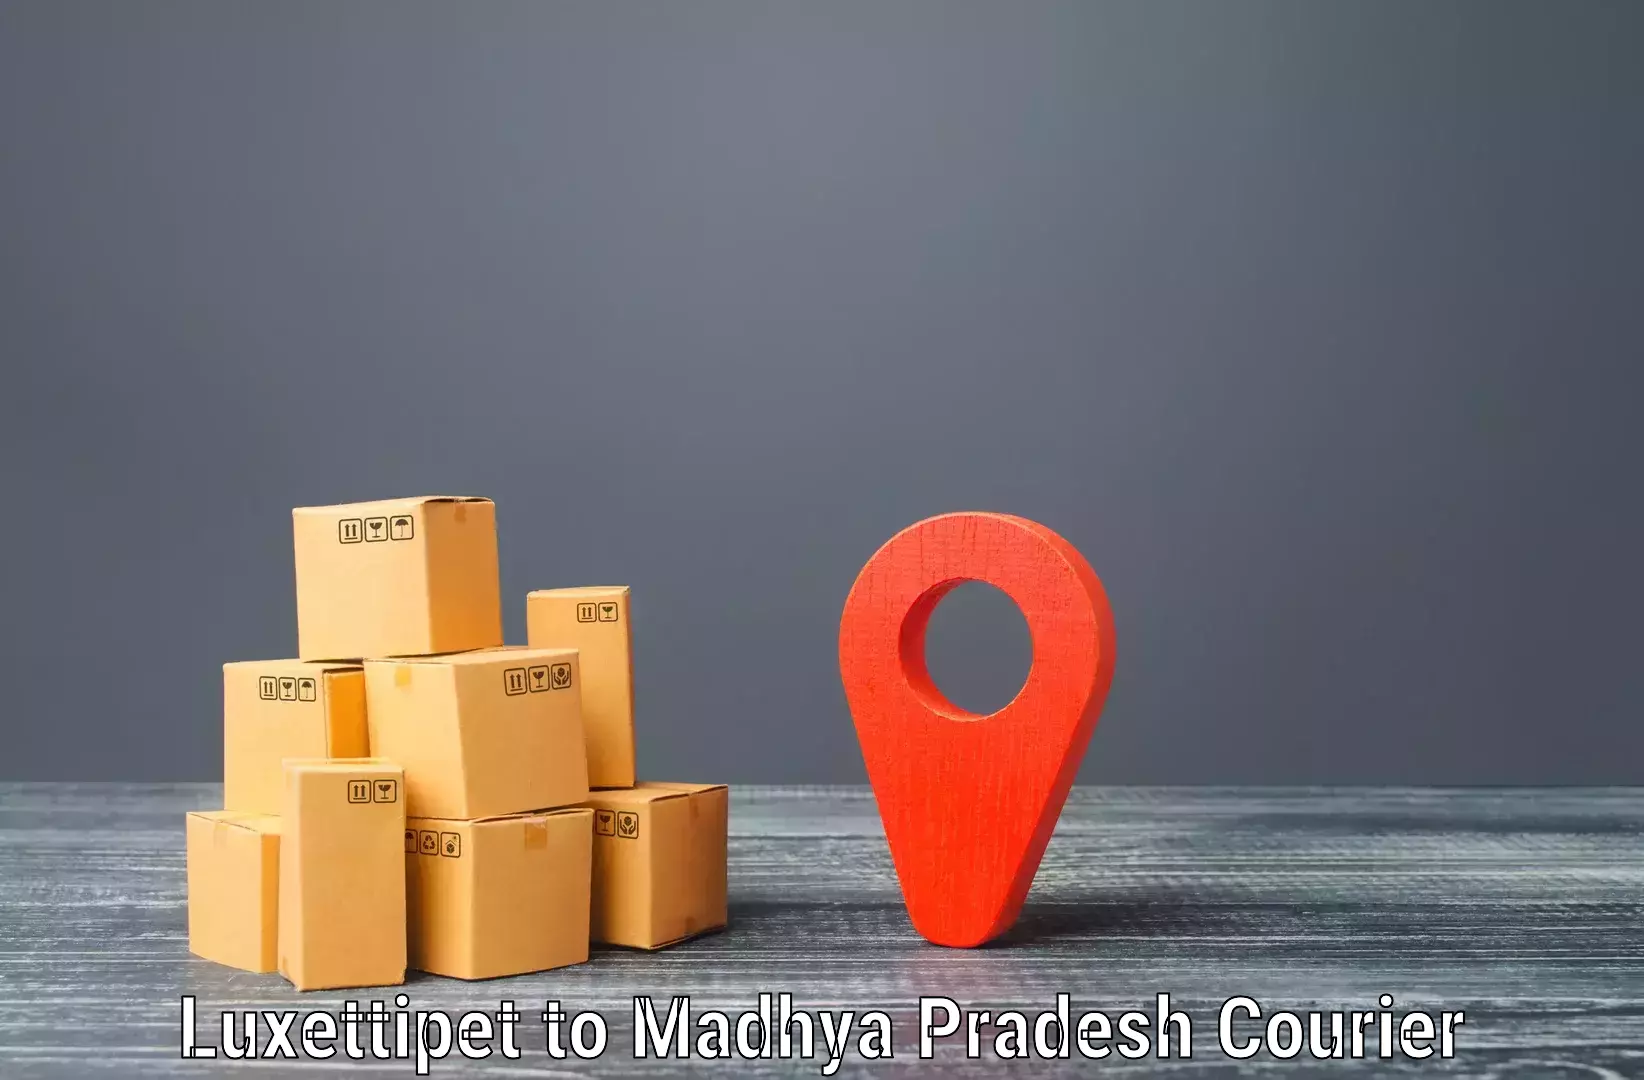 Flexible parcel services in Luxettipet to Niwari